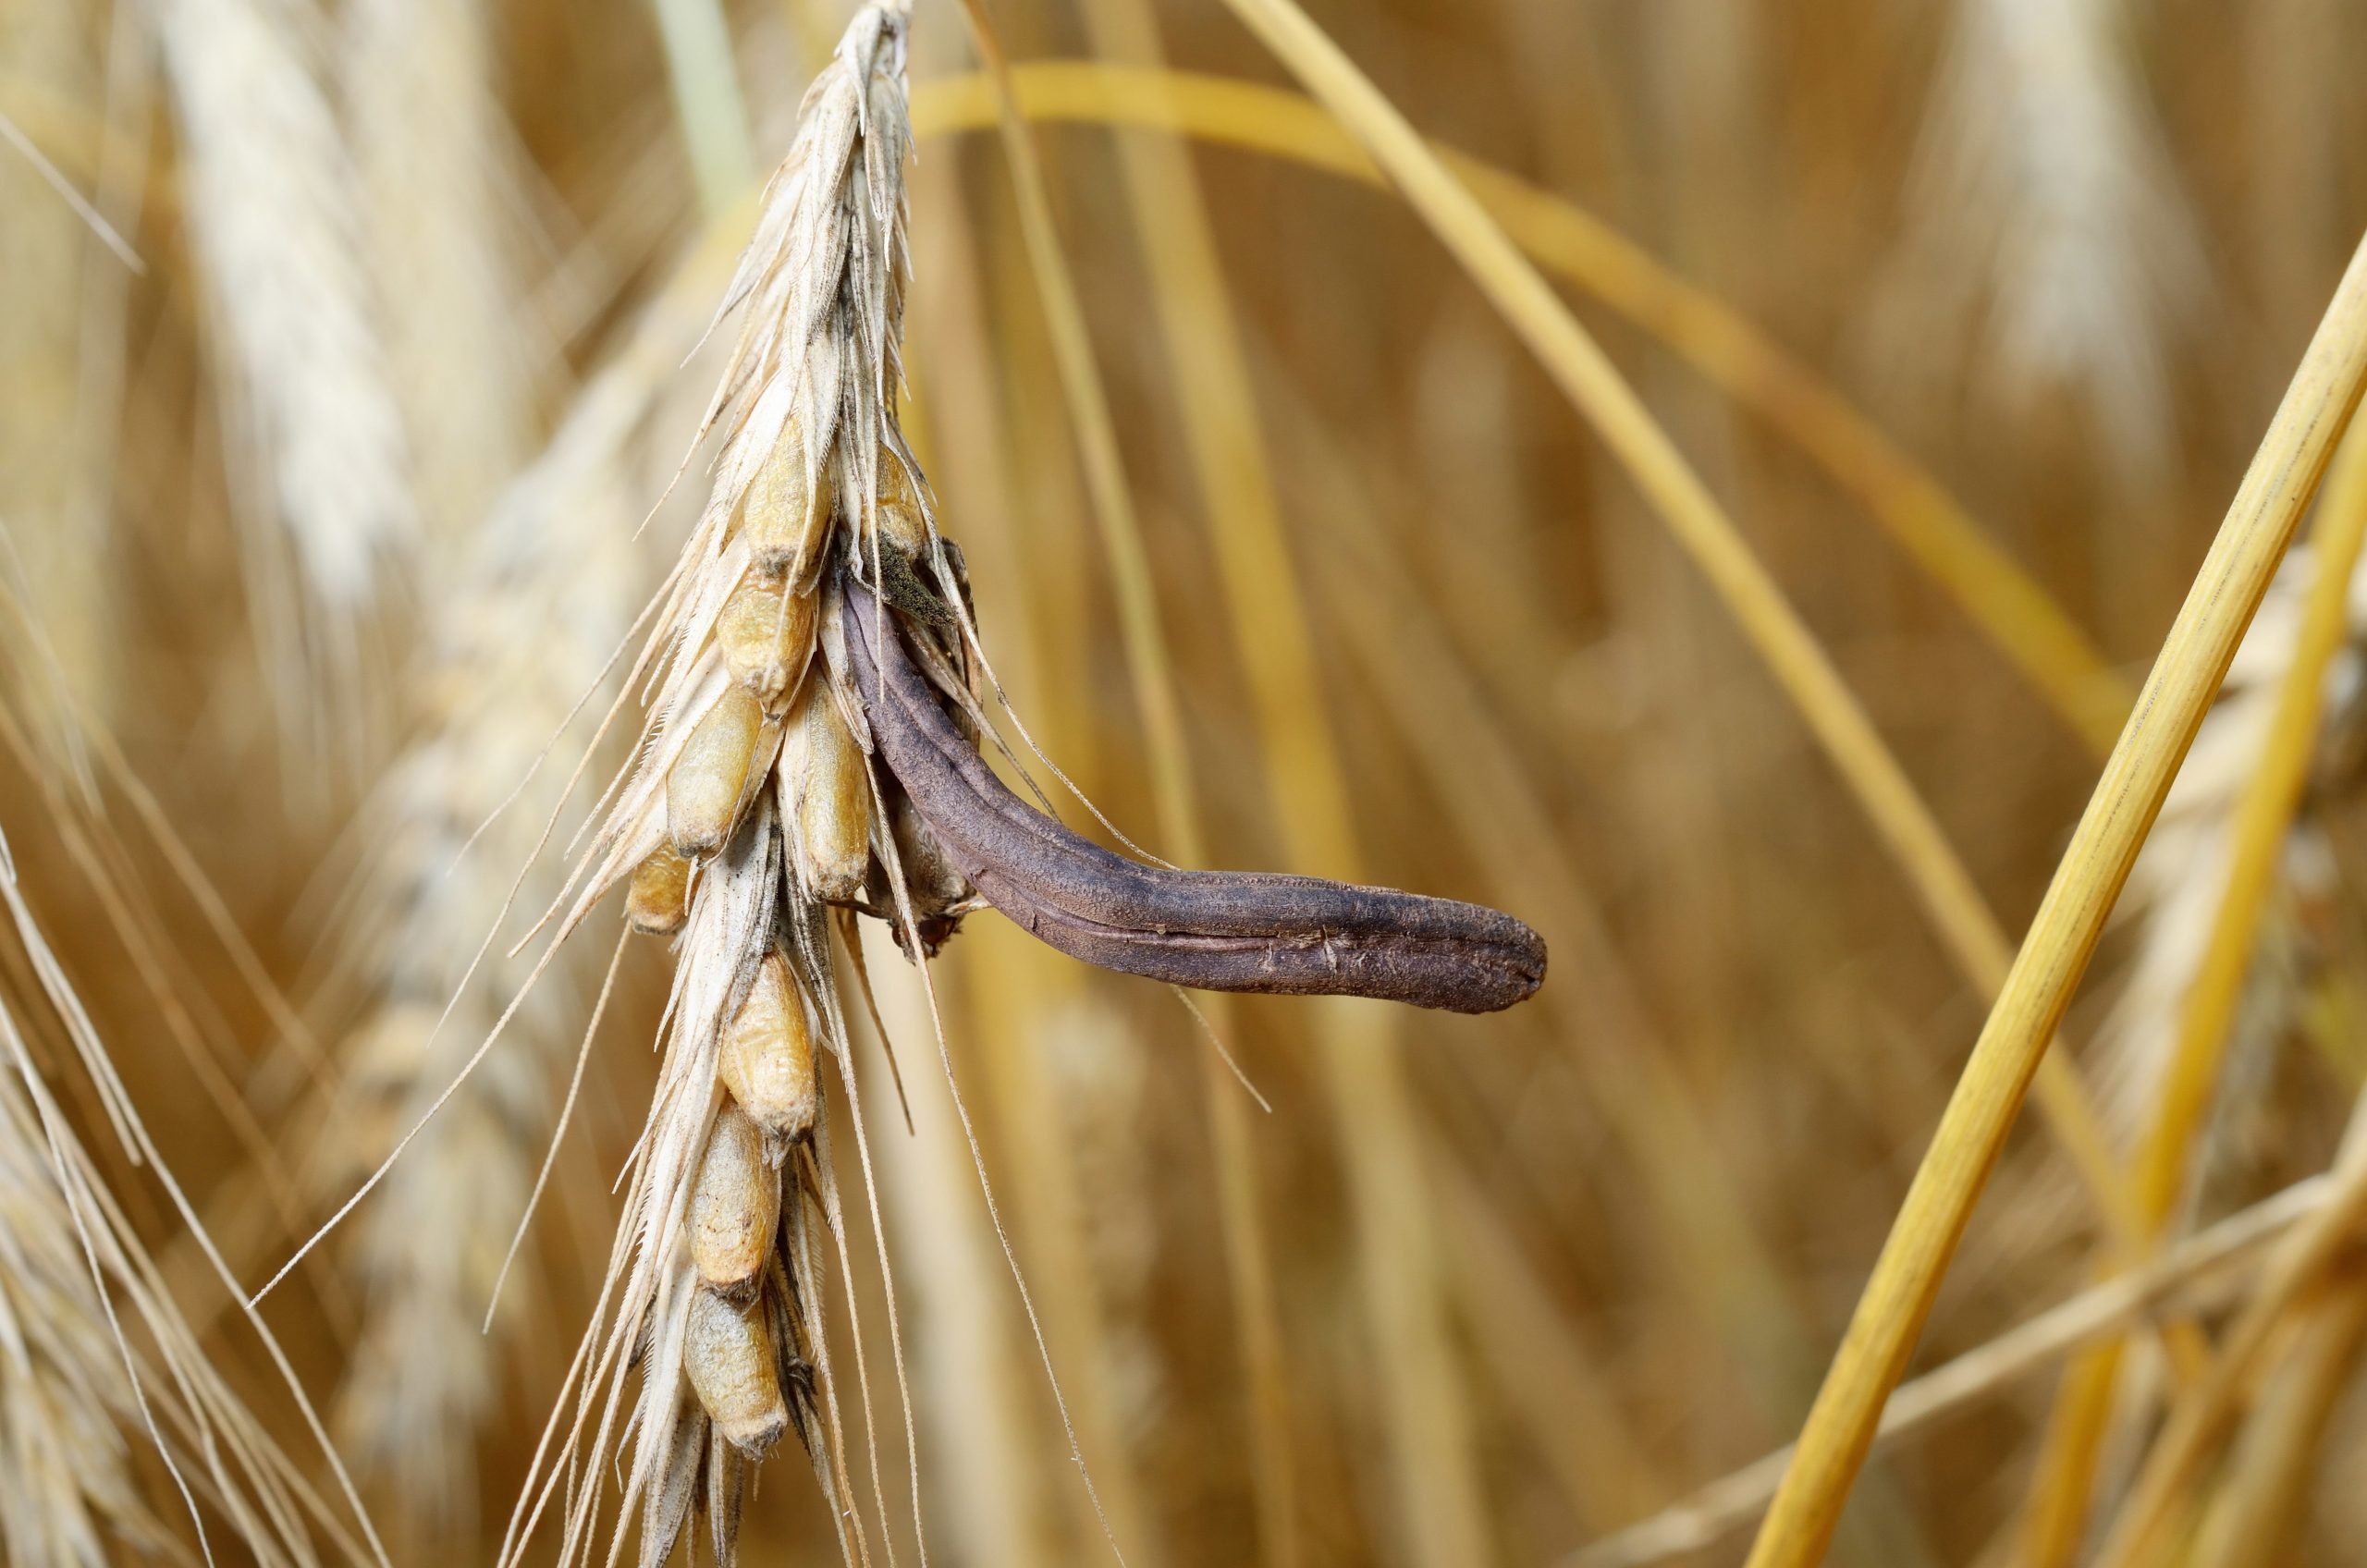 Is there a link between ulcers and mycotoxins? Photo: De Heus